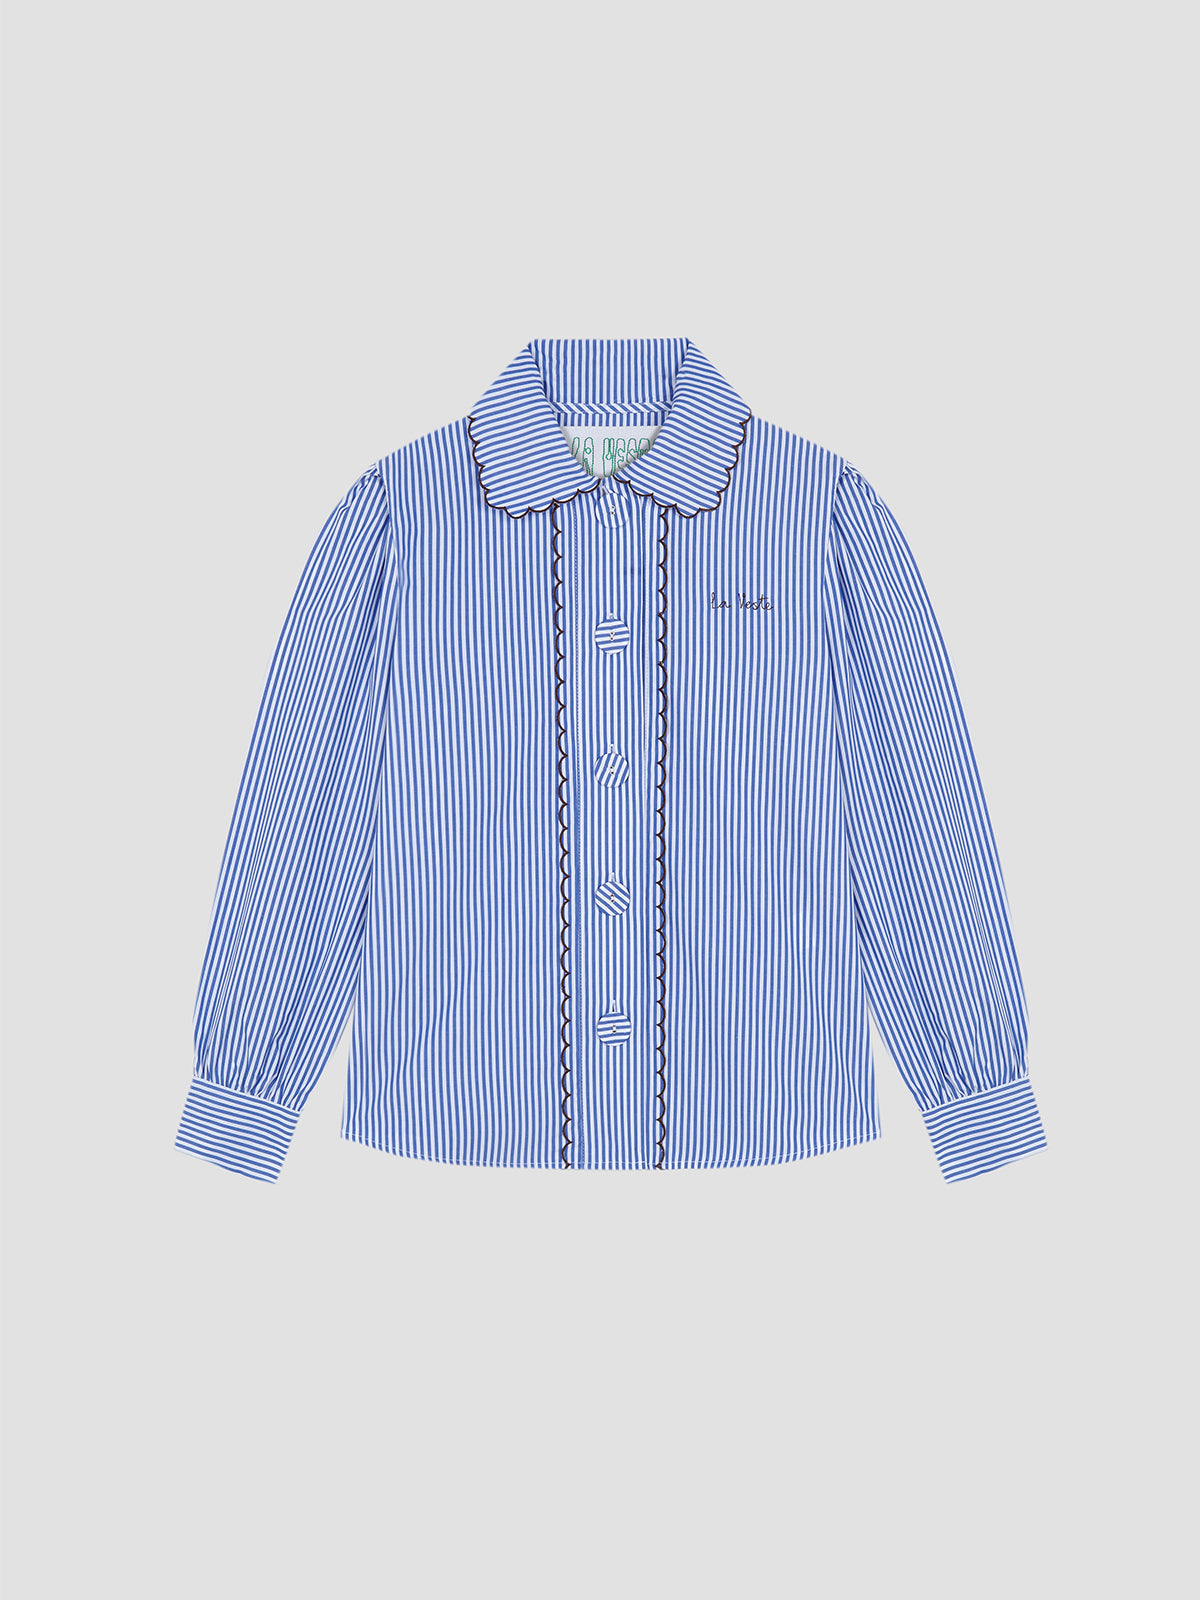 Blackboard Shirt Striped Blue is a long sleeve blue striped shirt with browan thread lace details and baby collar.